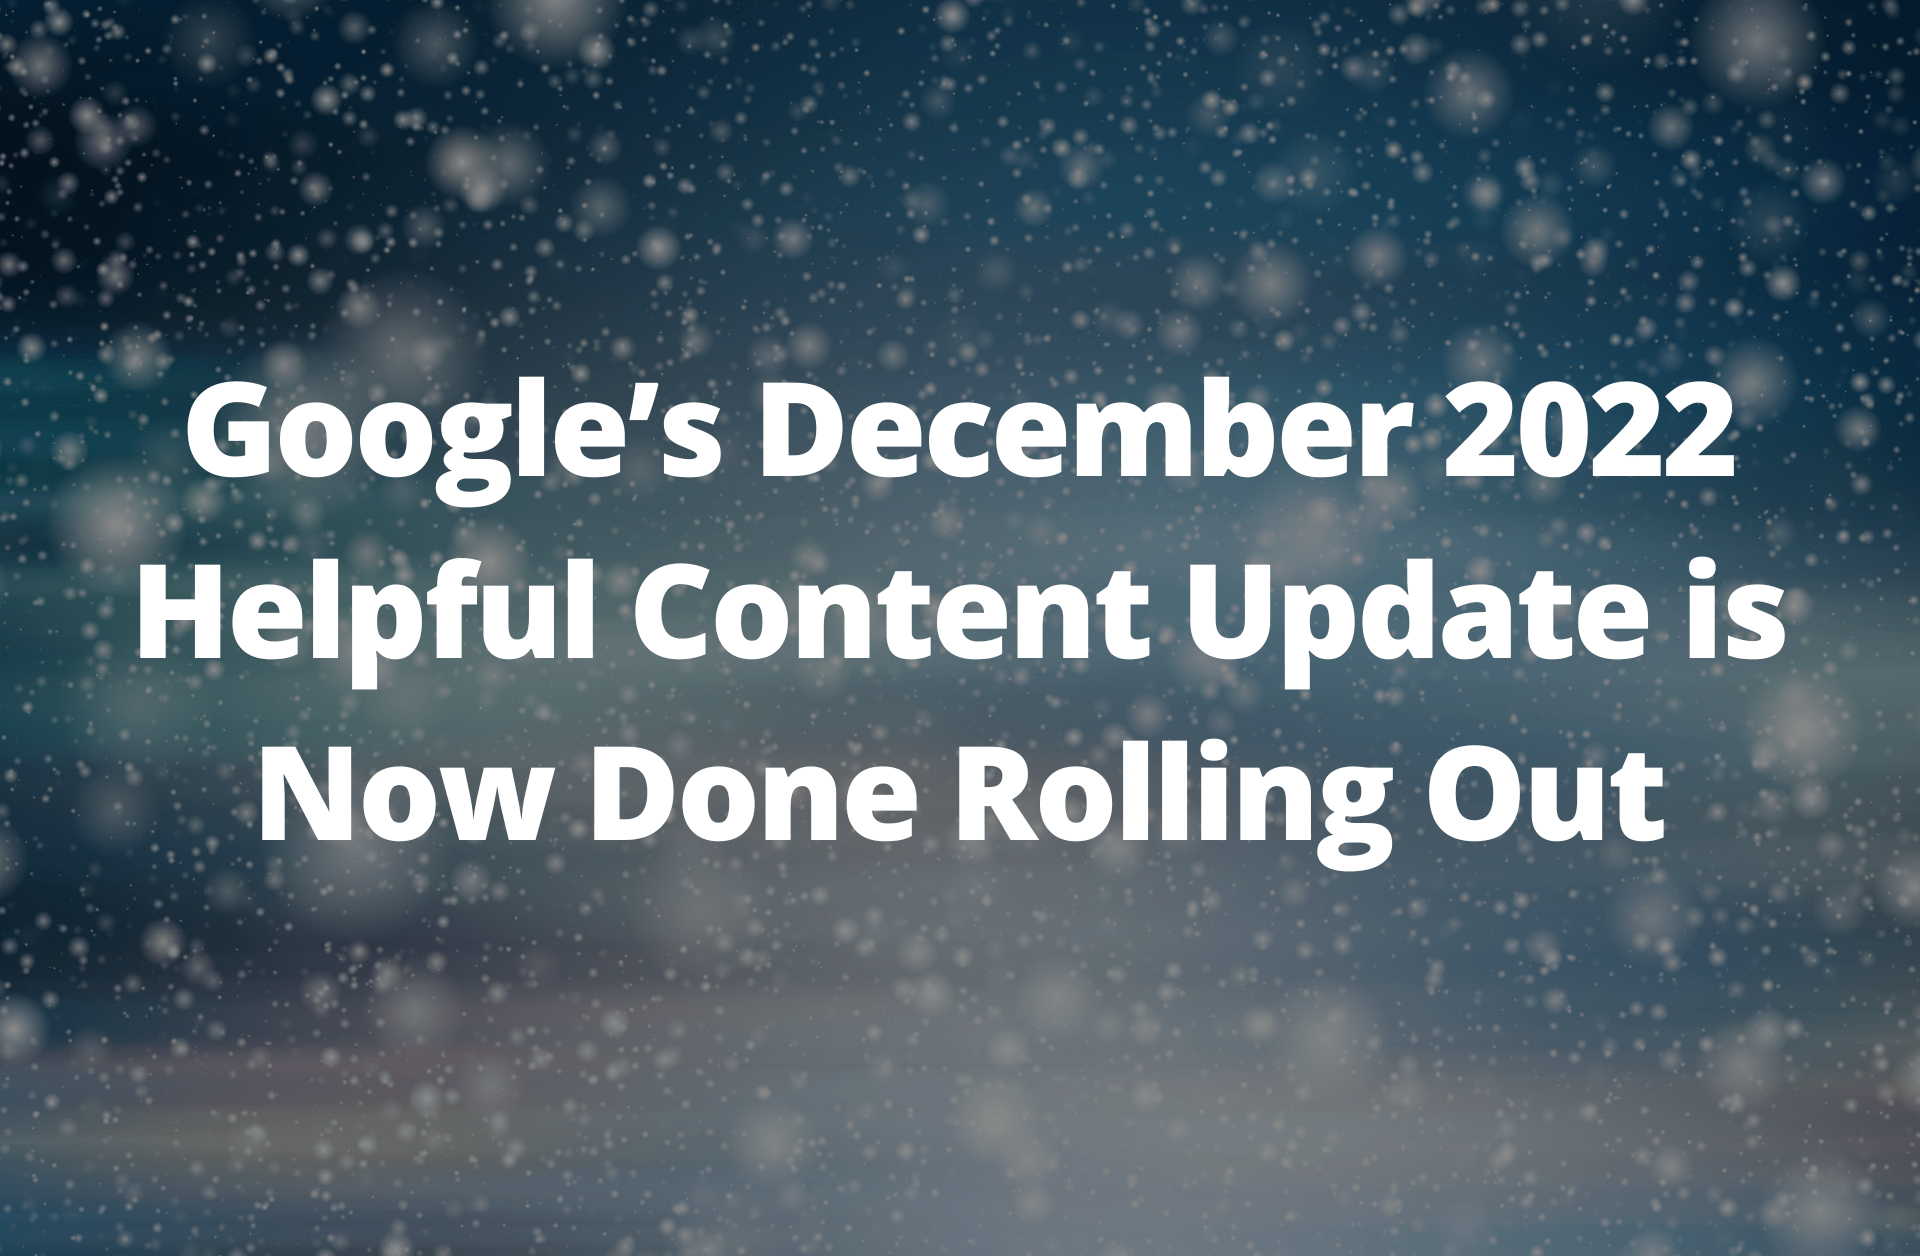 You are currently viewing Google’s December 2022 Helpful Content Update is Now Done Rolling Out